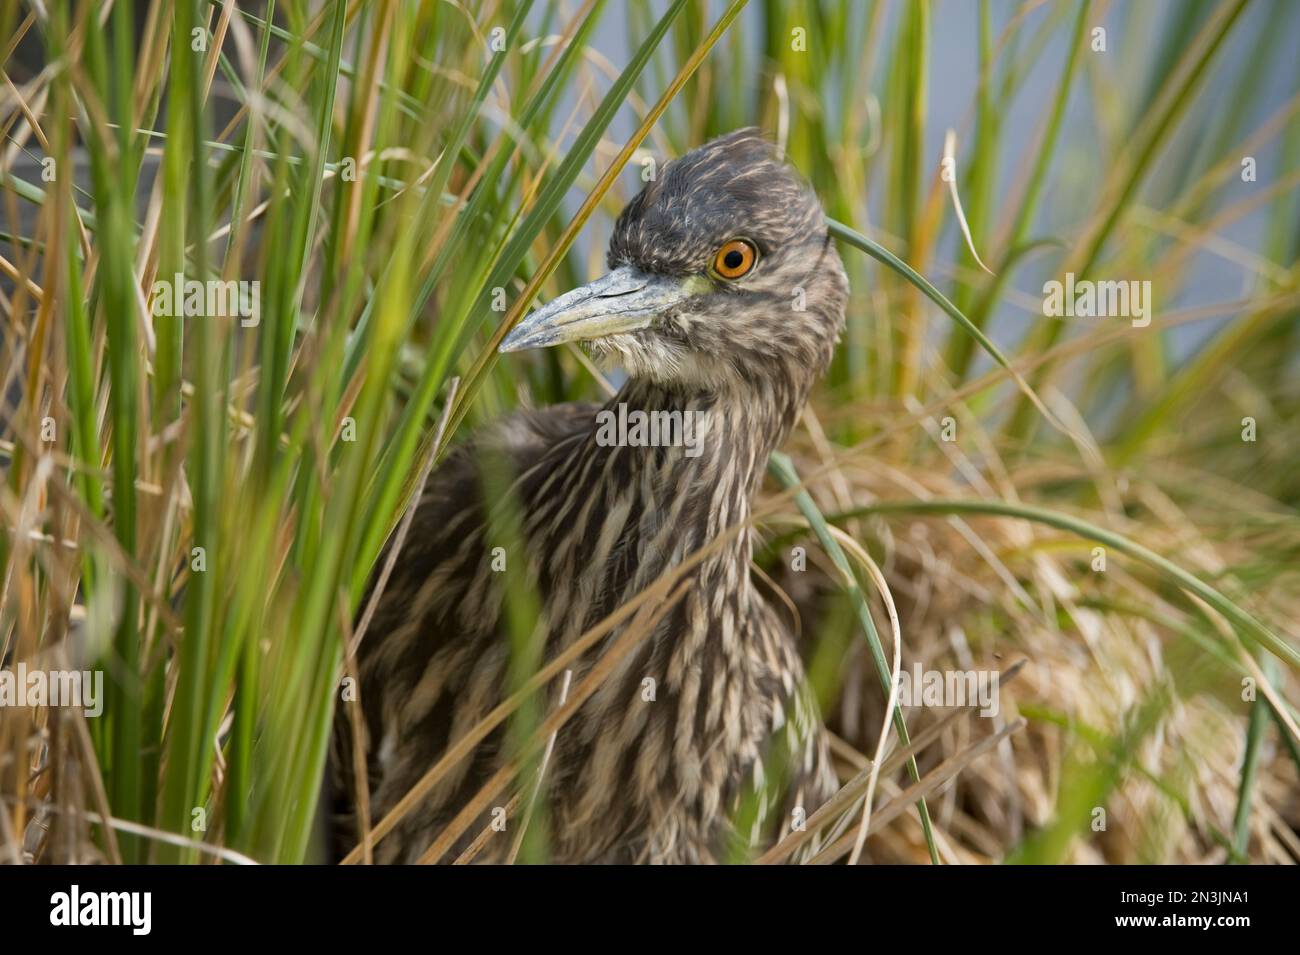 Young Black-crowned night heron (Nycticorax nycticorax) hiding in grasses; Carcass Island, West Falkland Islands, British Overseas Territory Stock Photo